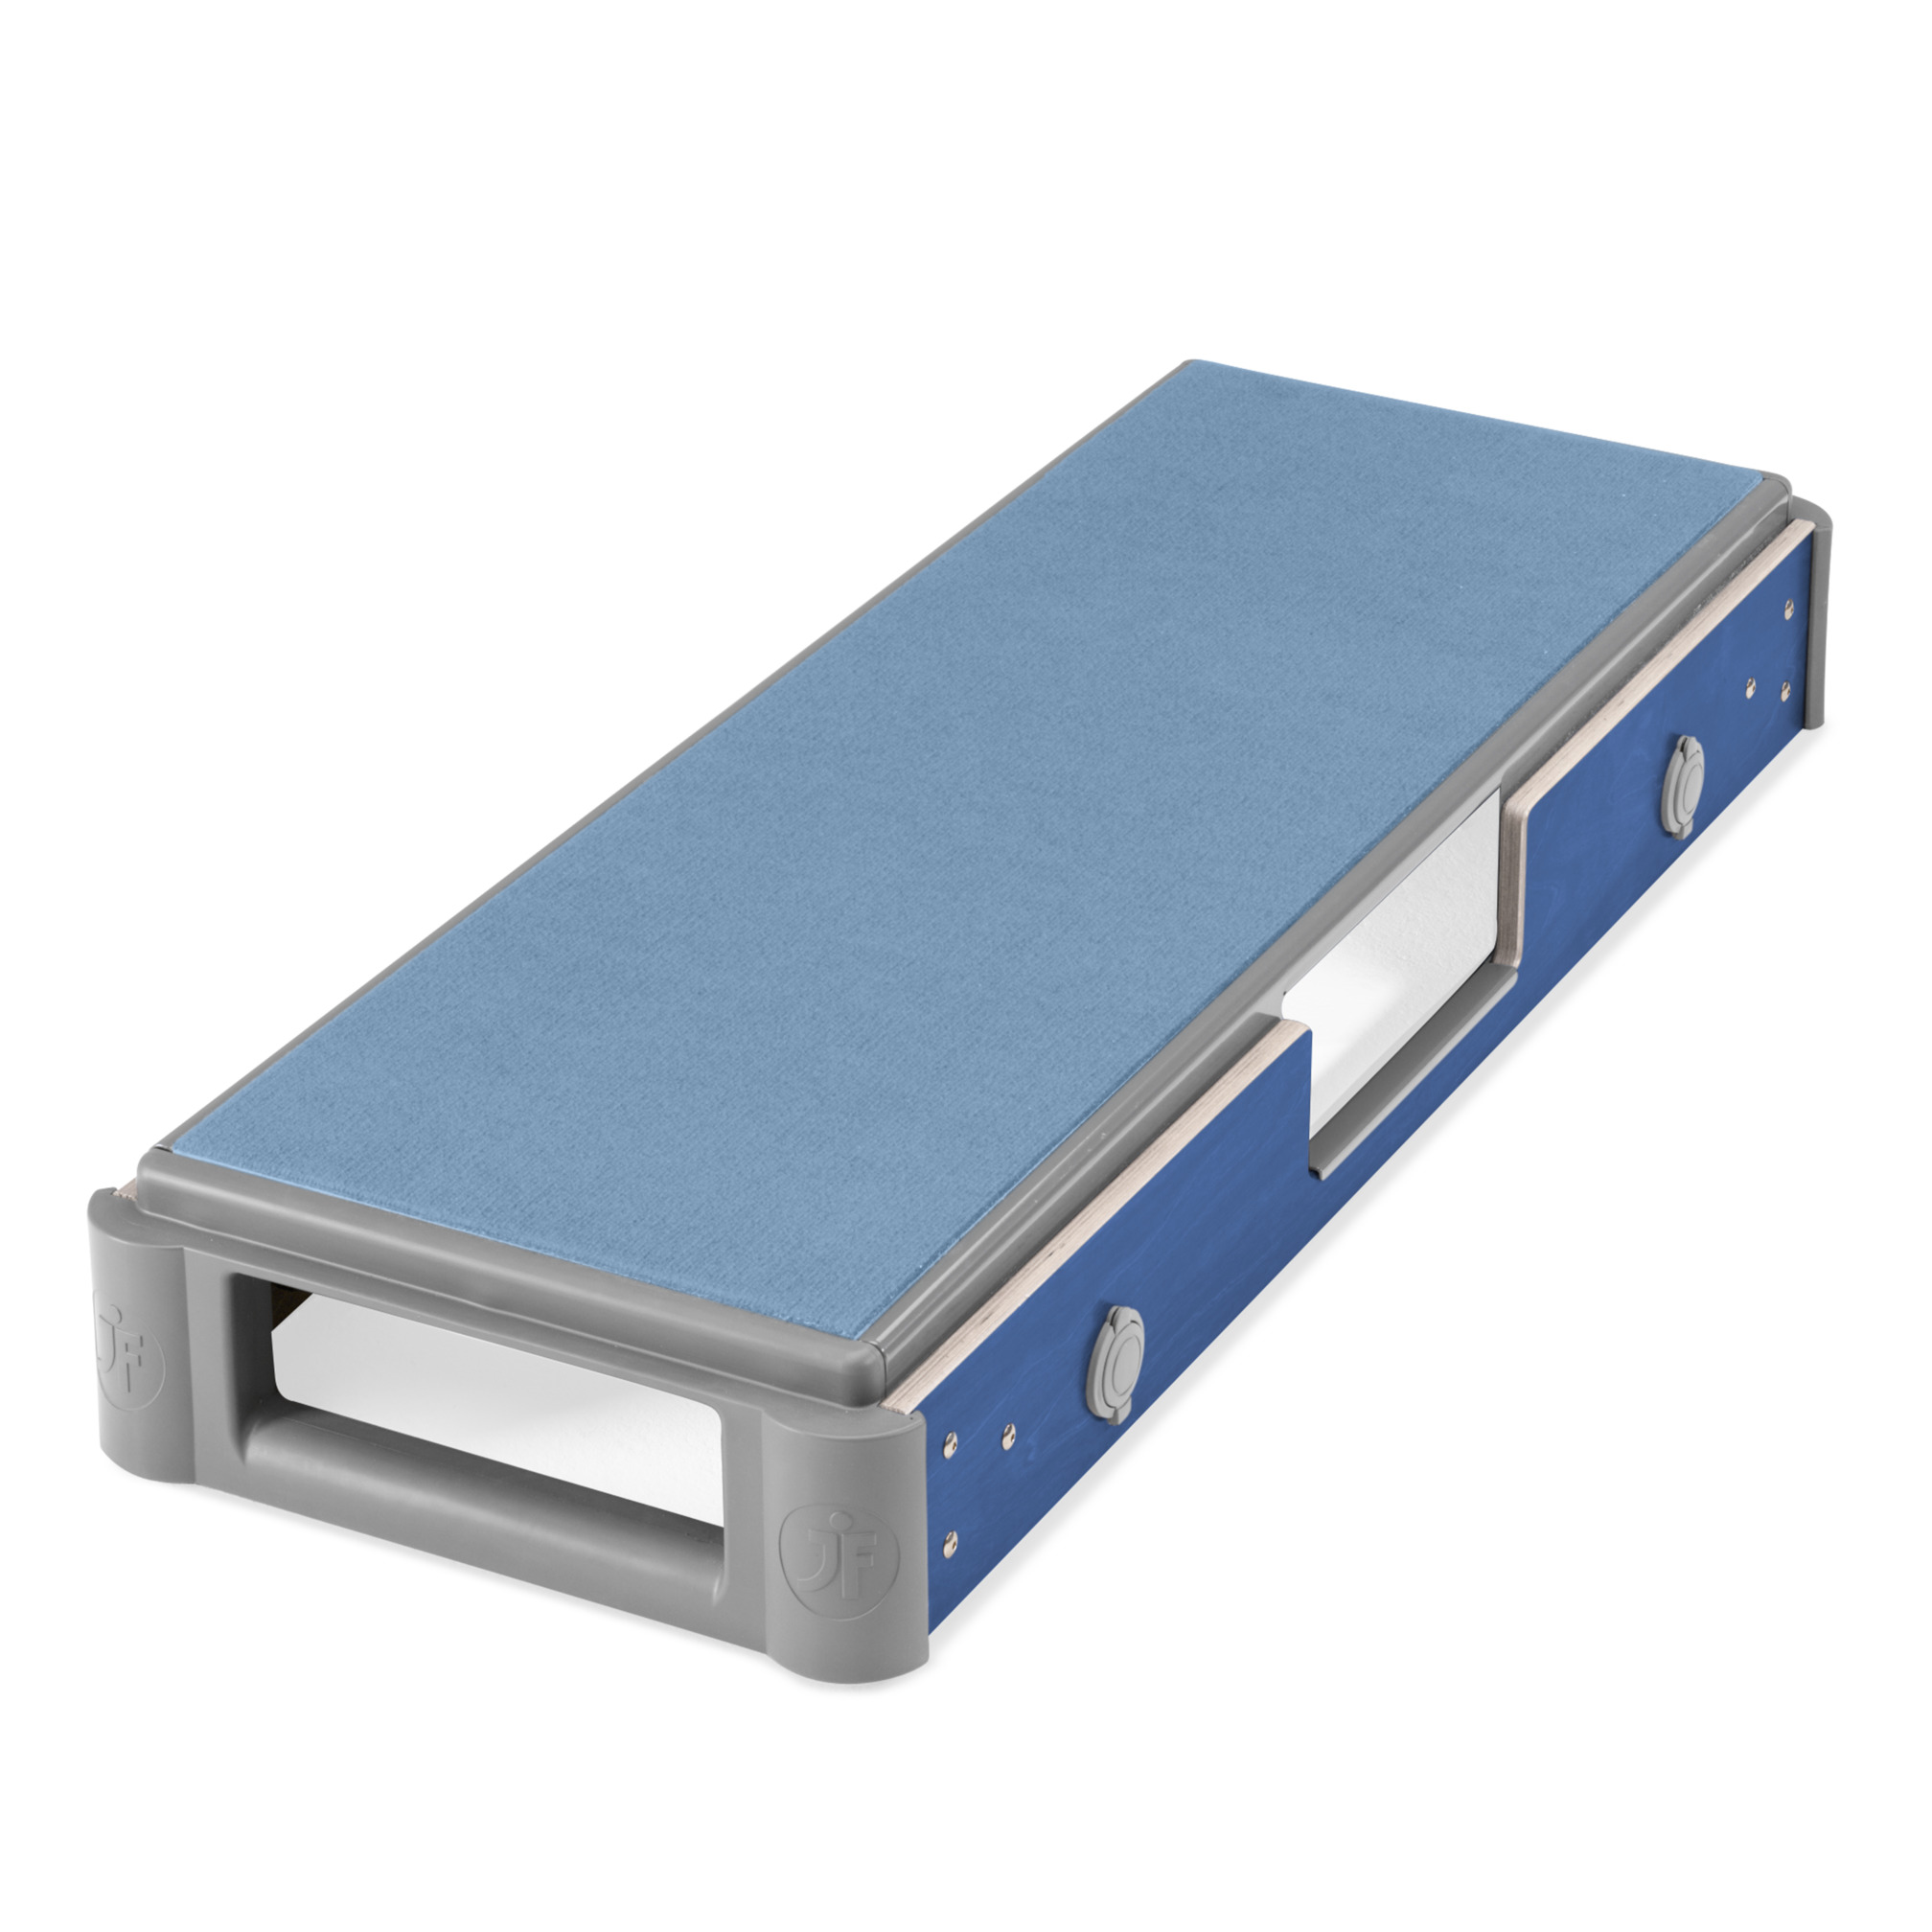 Closed Vaulting Box® intermediate section, open long sides